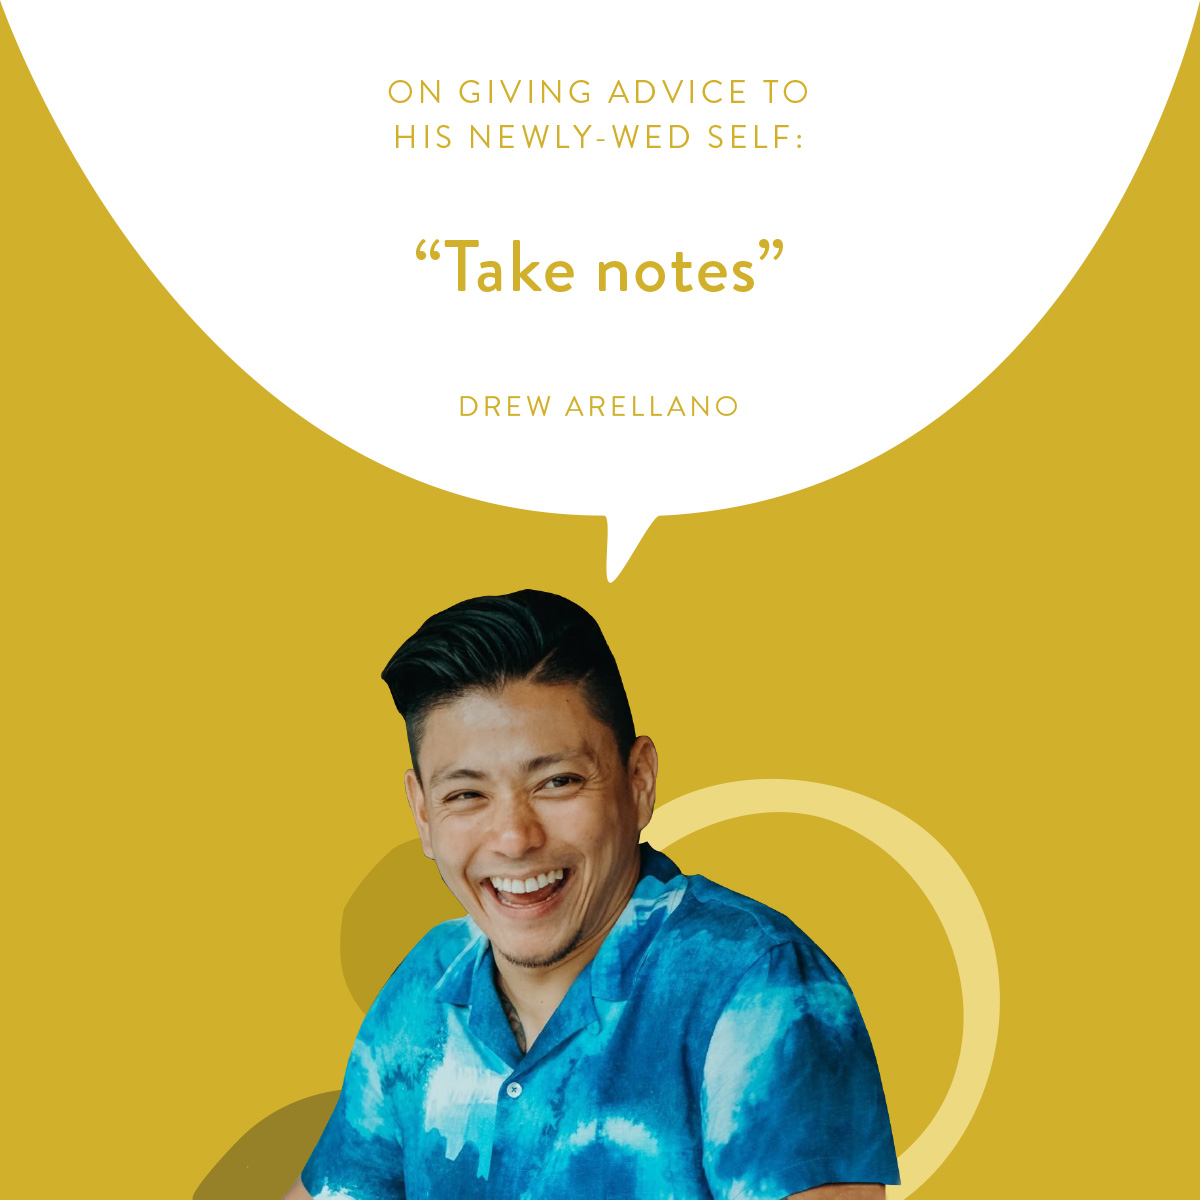 (Layout) On Giving Advice to His Newly-Wed Self:  "Take notes." -Drew Arellano